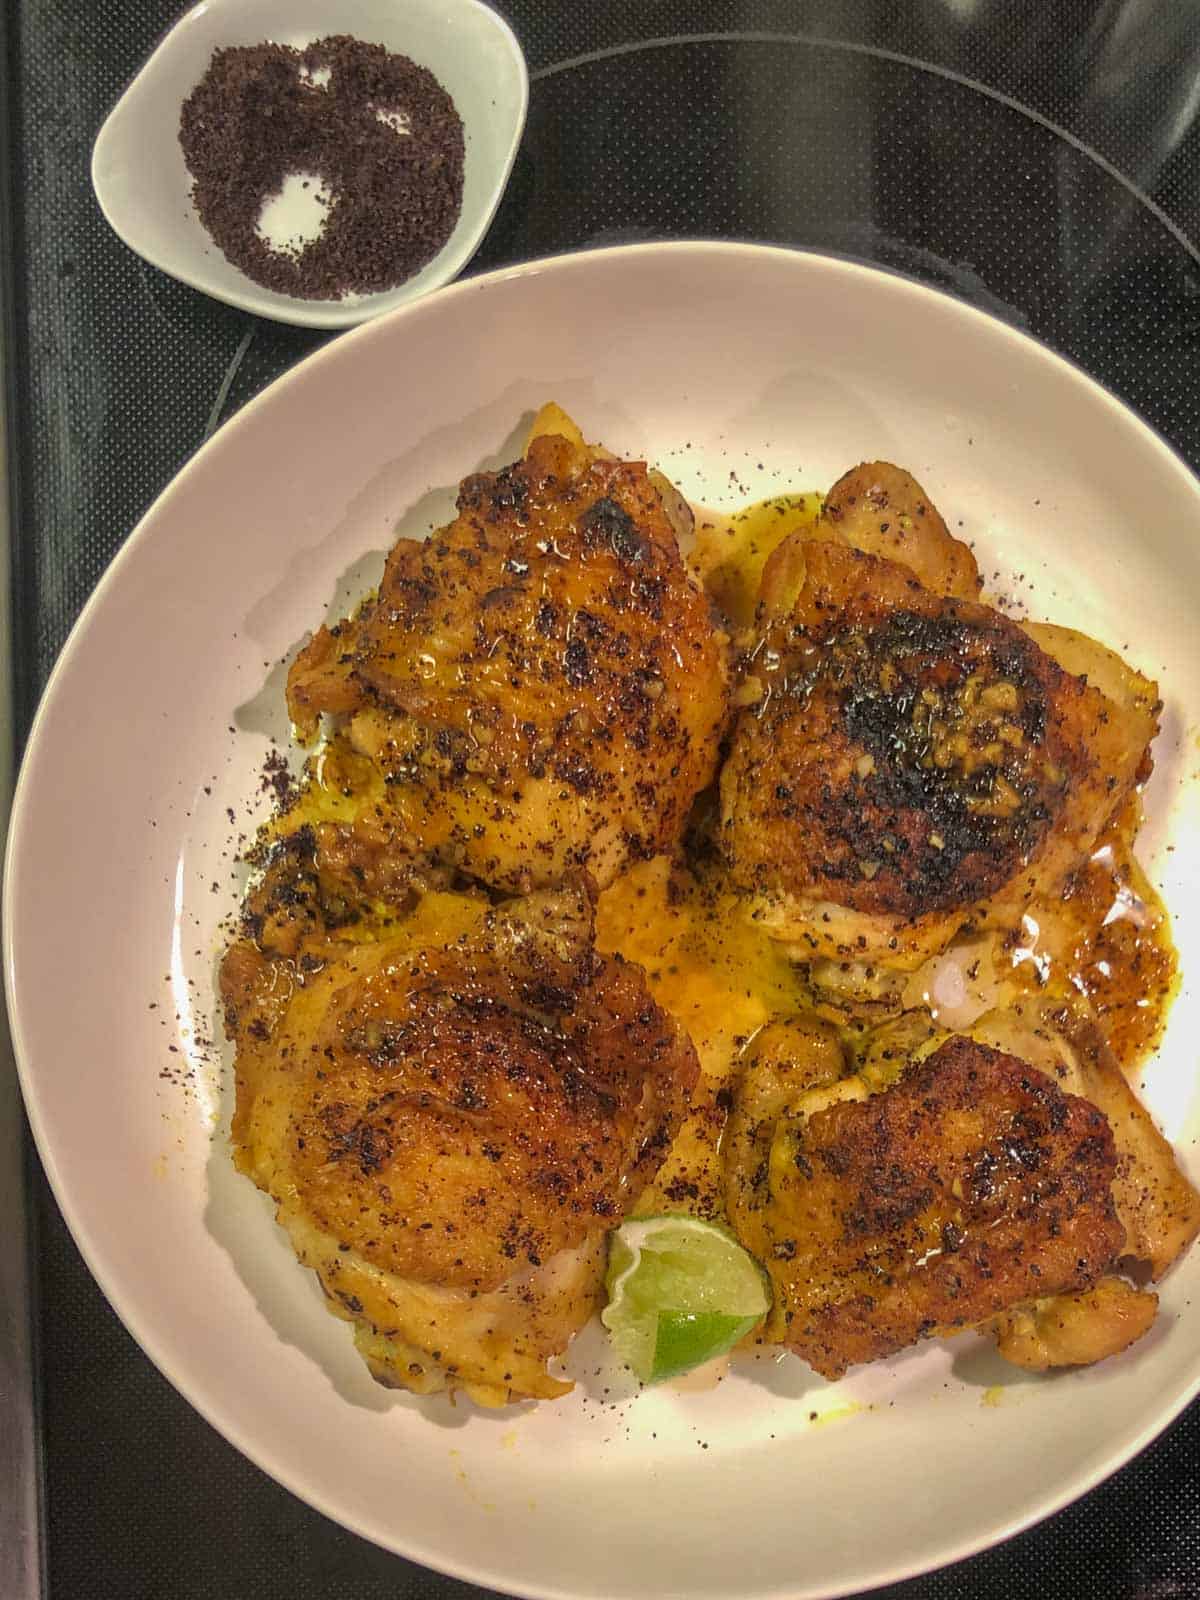 Browned and cooked chicken thighs sprinkled with sumac and sitting in a yellow tinged braising sauce with lime wedges in a white dish with some sumac in a small white dish in the background.